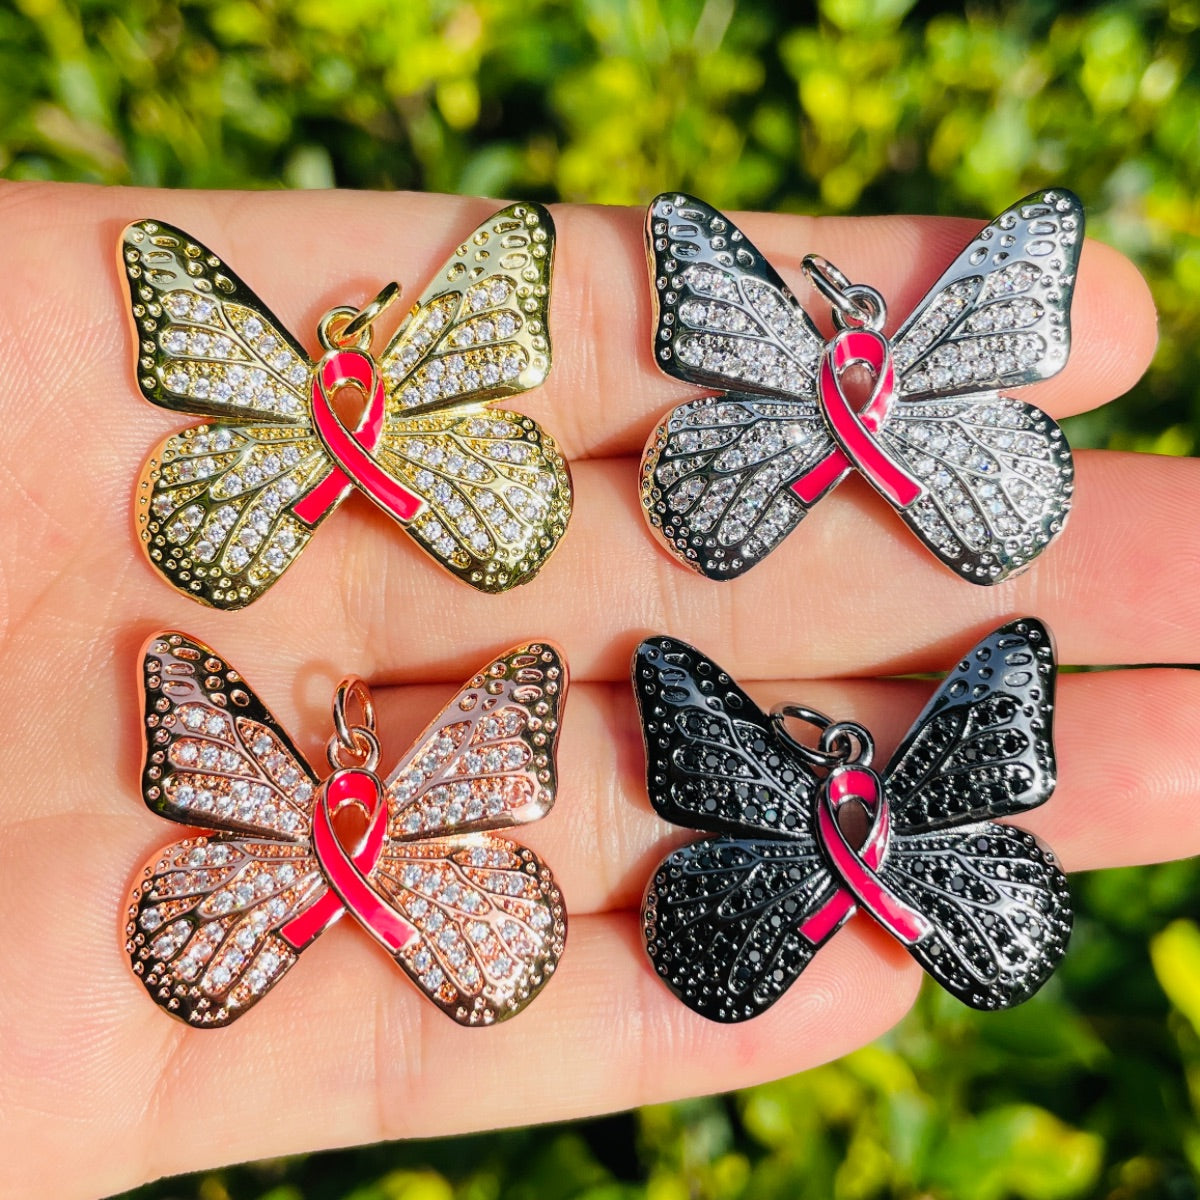 10pcs/lot CZ Pave Pink Ribbon Butterfly Charms - Breast Cancer Awareness Mix Colors CZ Paved Charms Breast Cancer Awareness Butterflies New Charms Arrivals Charms Beads Beyond